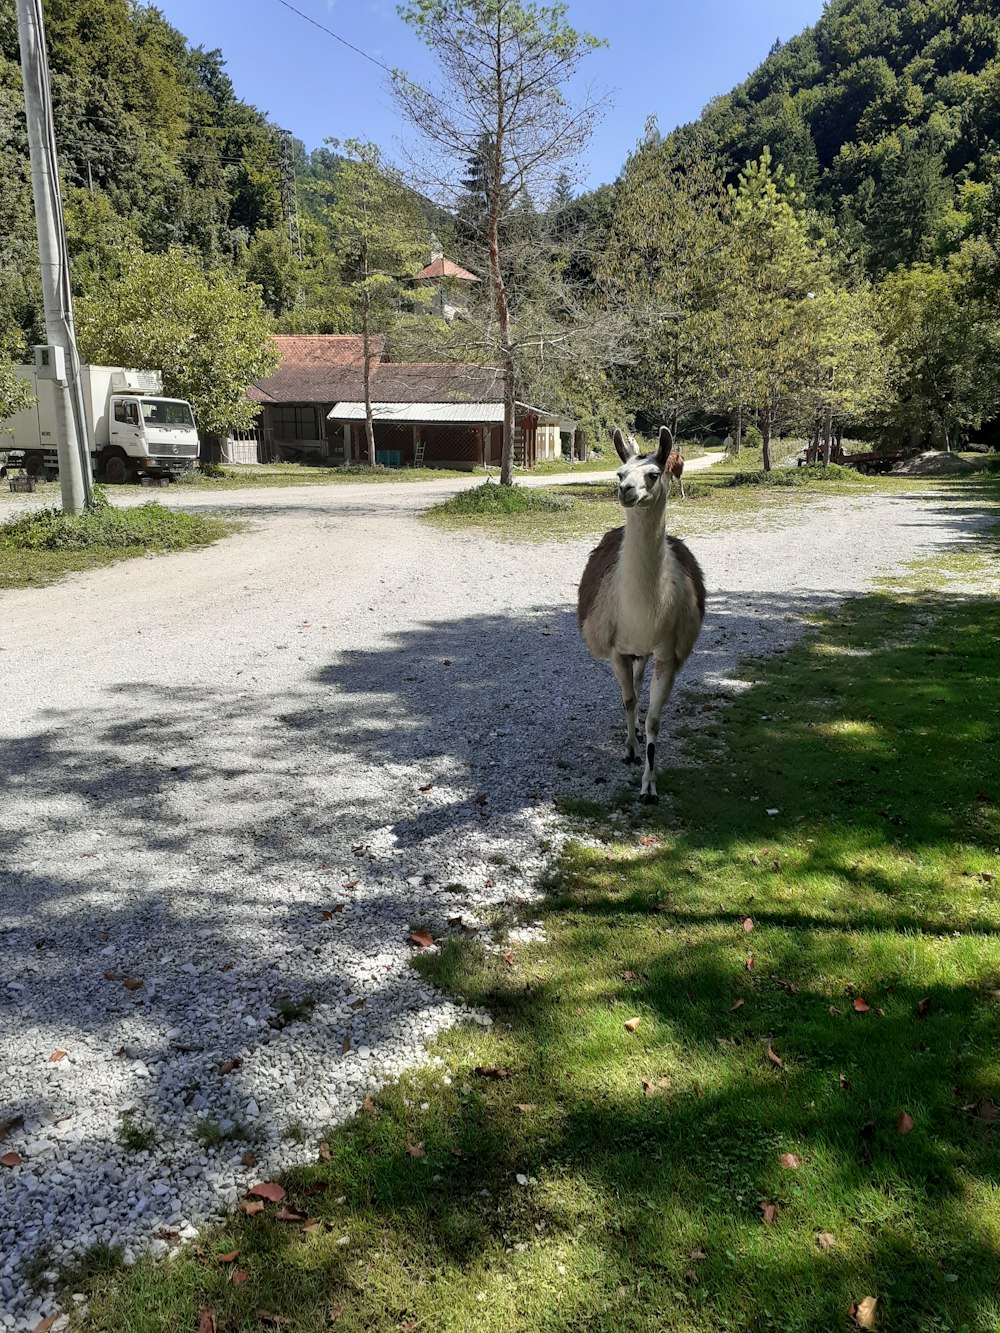 a deer standing on a road